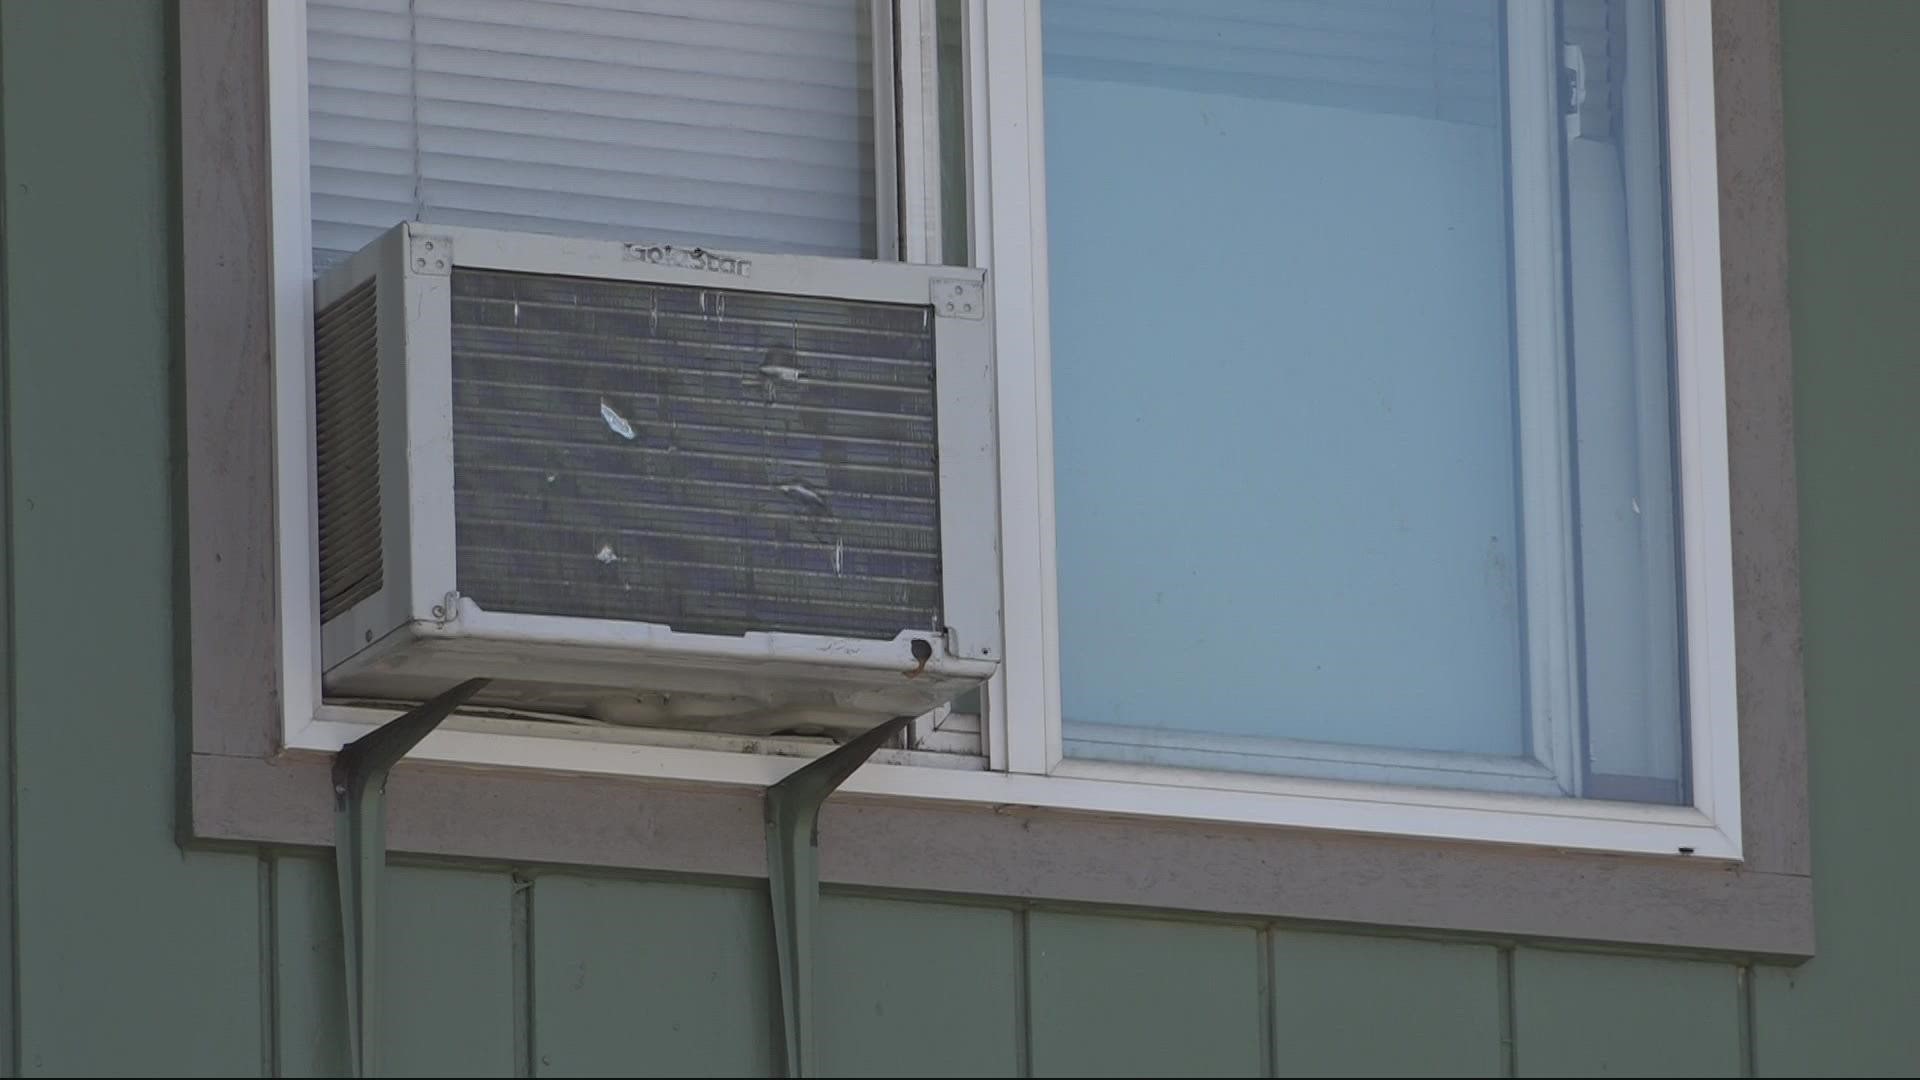 Some tenants at a low-income apartment complex in Newberg have to choose between living without AC or getting evicted.